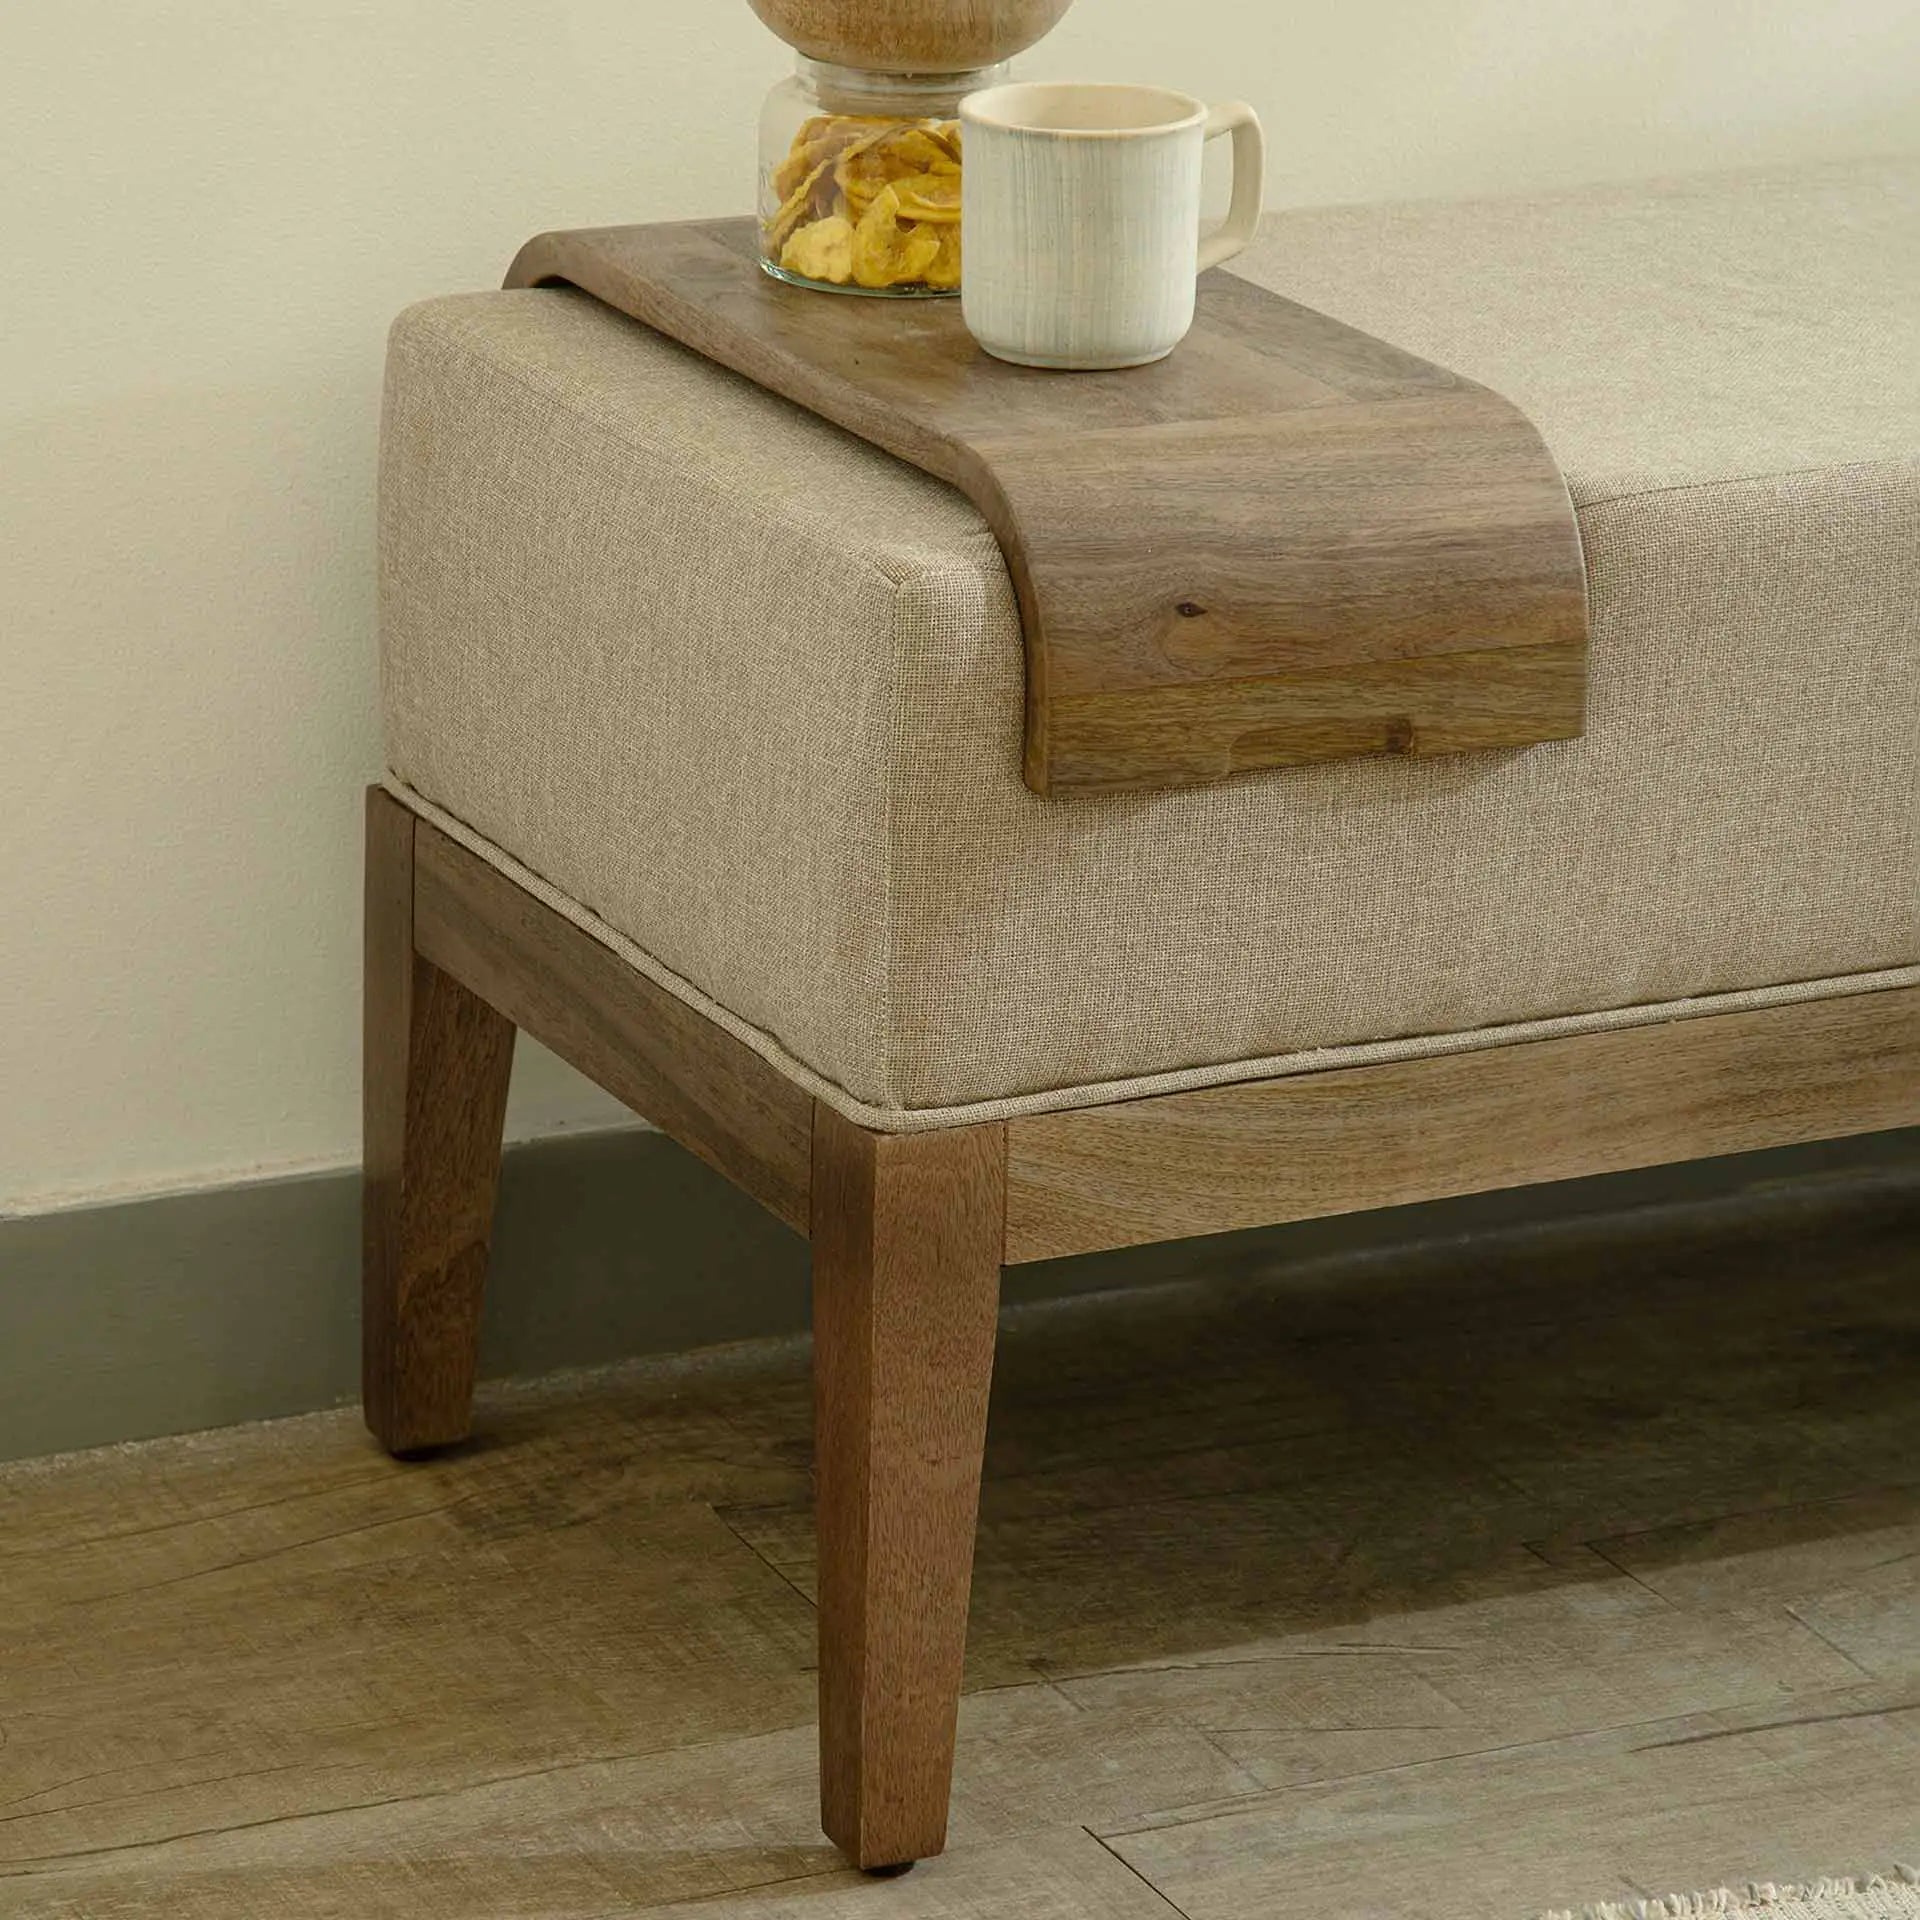 Upholstered Wooden Bench with Wooden Slider